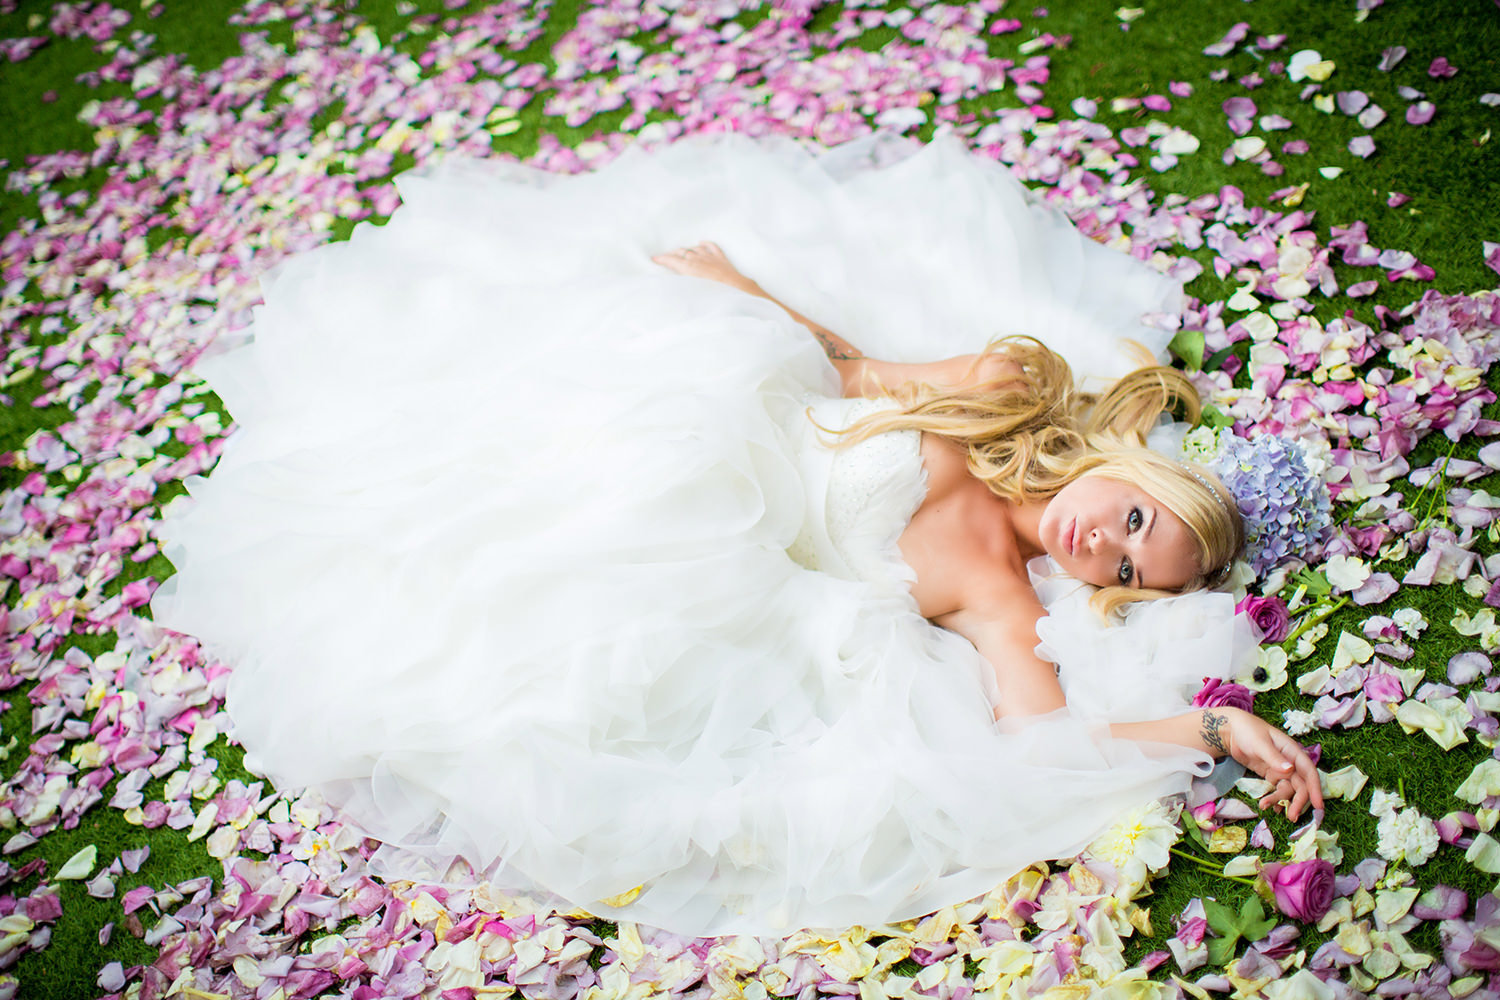 Amazing bridal portrait of bride laying on a bed of rose petals